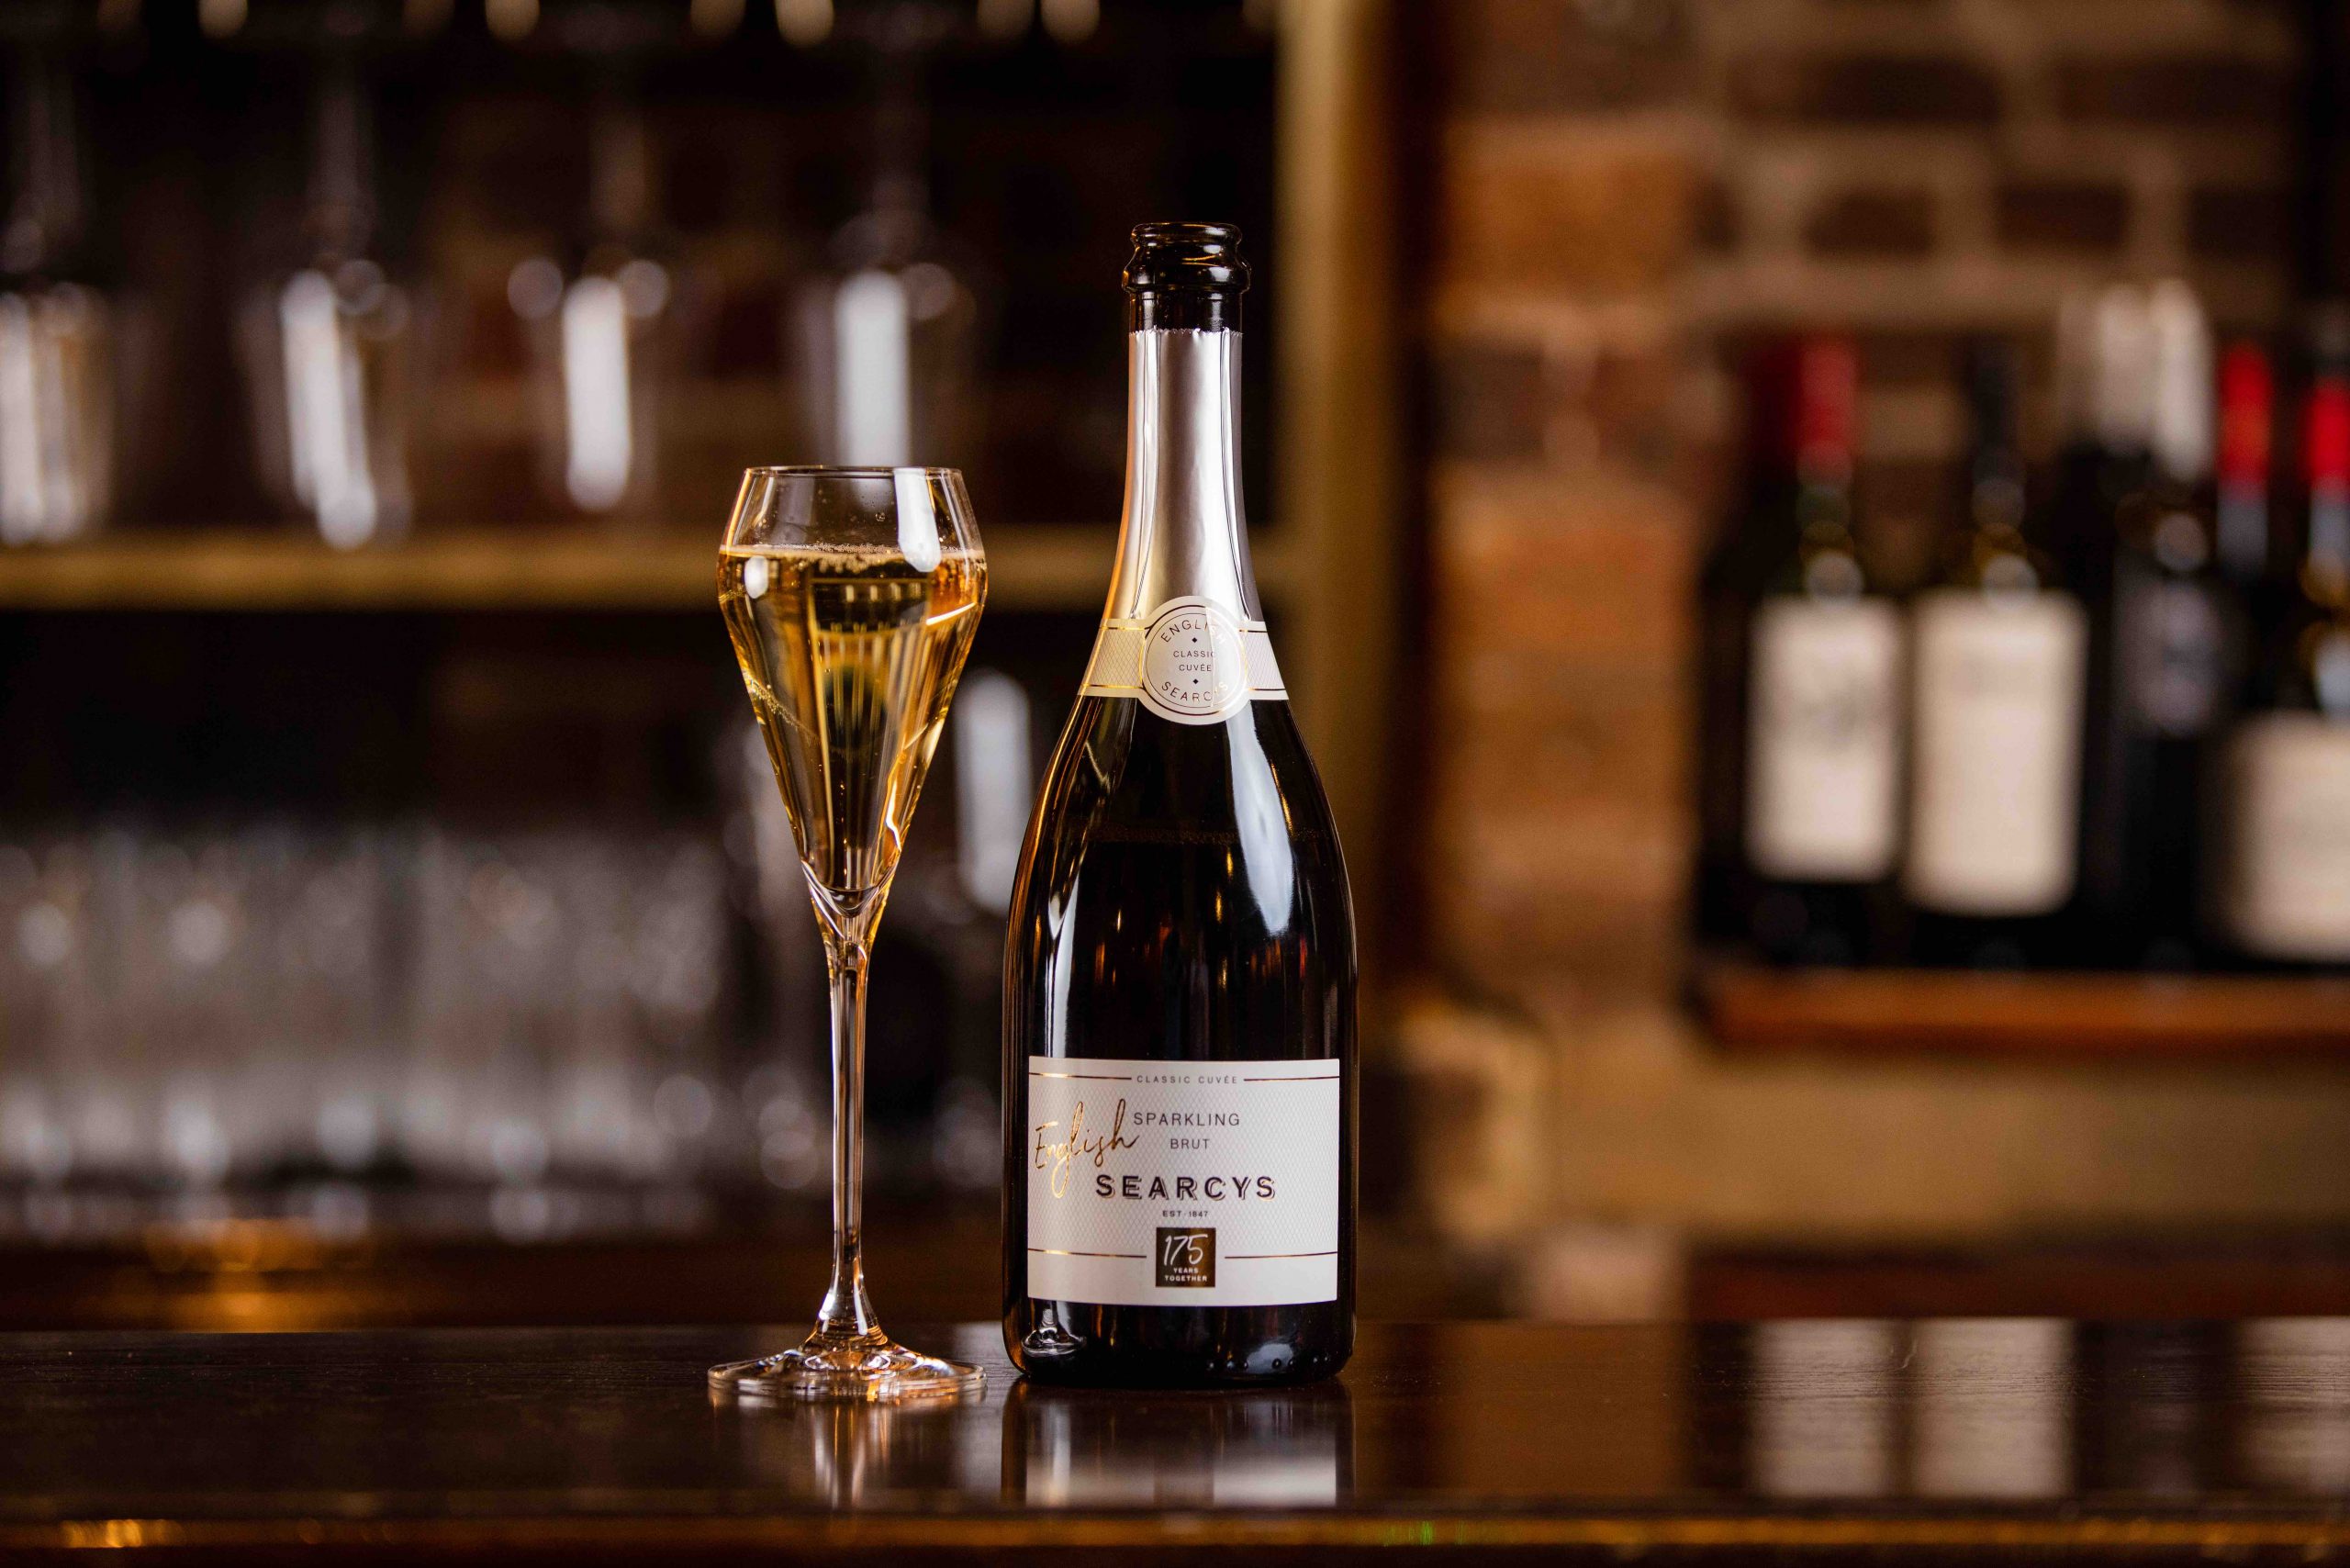 Searcys releases first English sparkling wine to mark 175 year anniversary